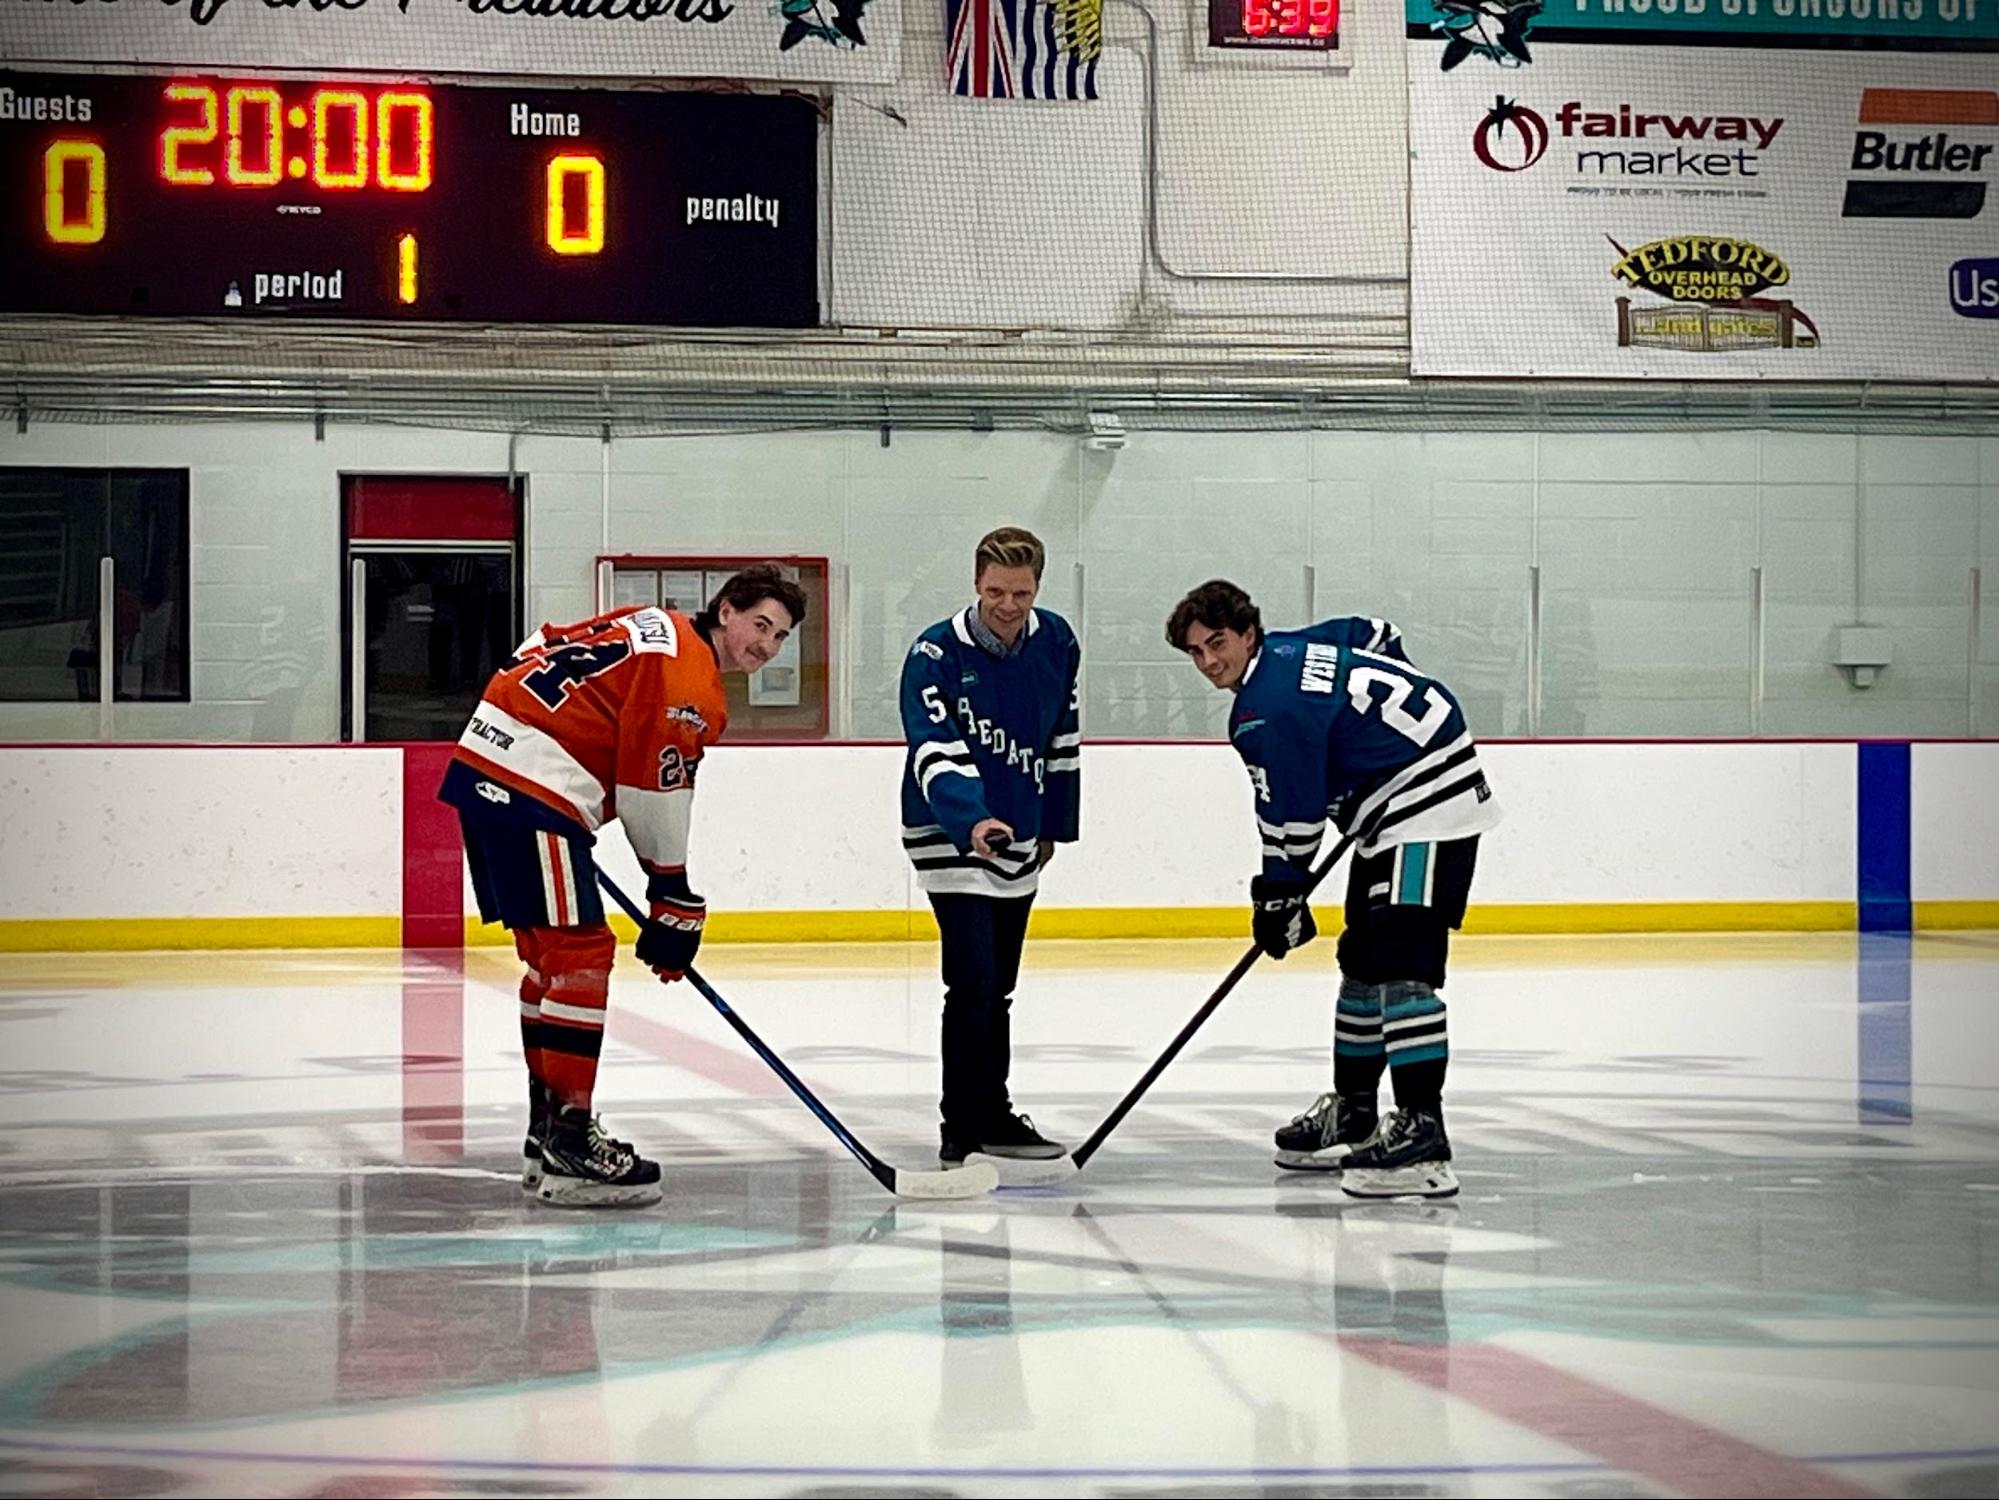 Dean stands between two hockey players on an ice rink, about to drop a puck.